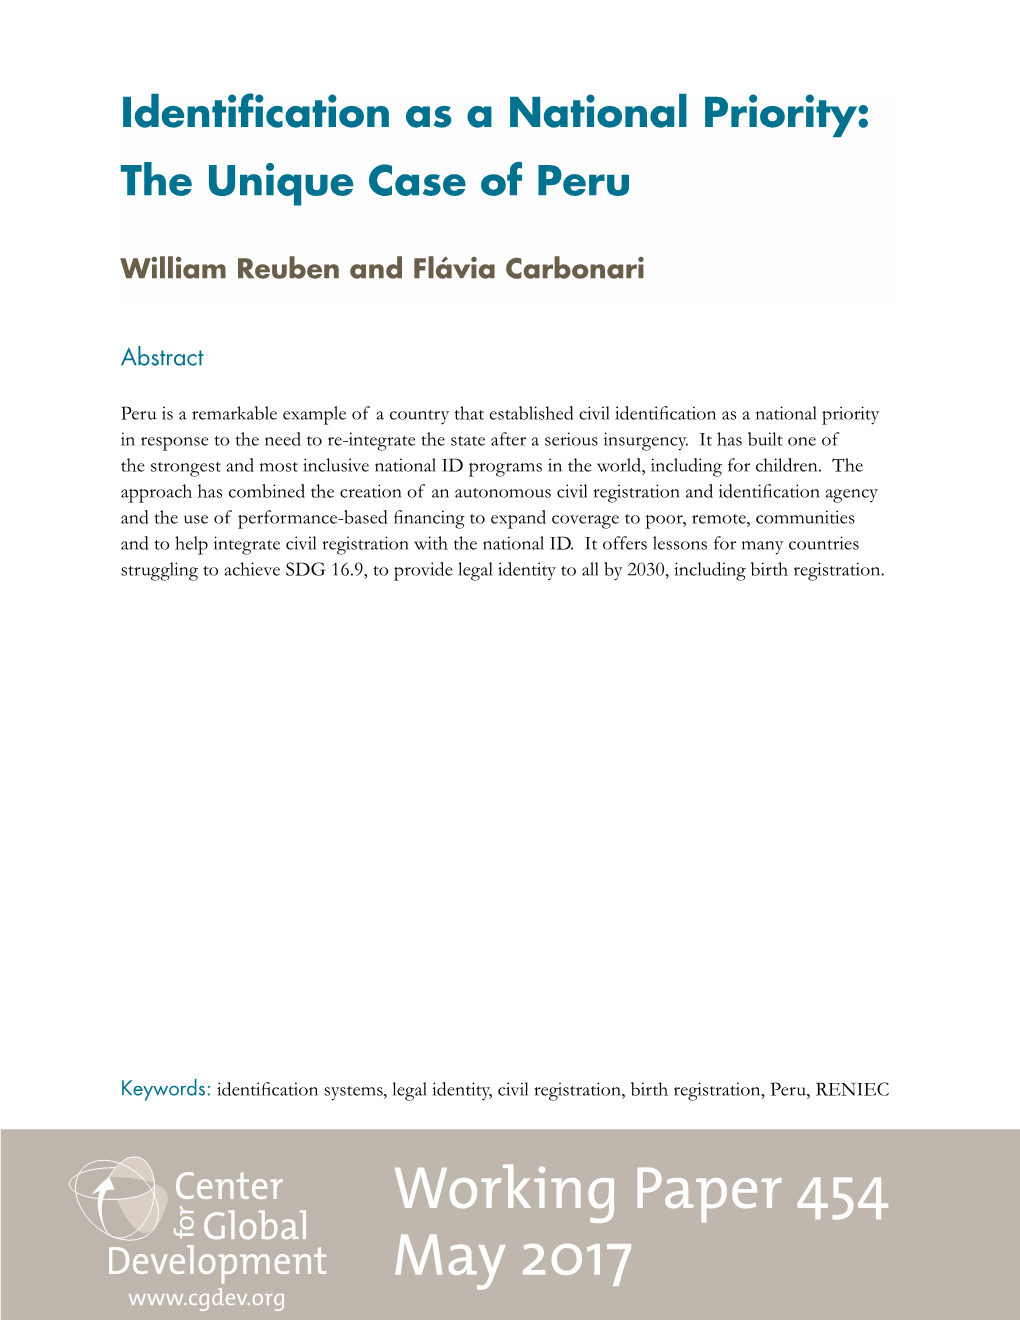 Identification As a National Priority: the Unique Case of Peru